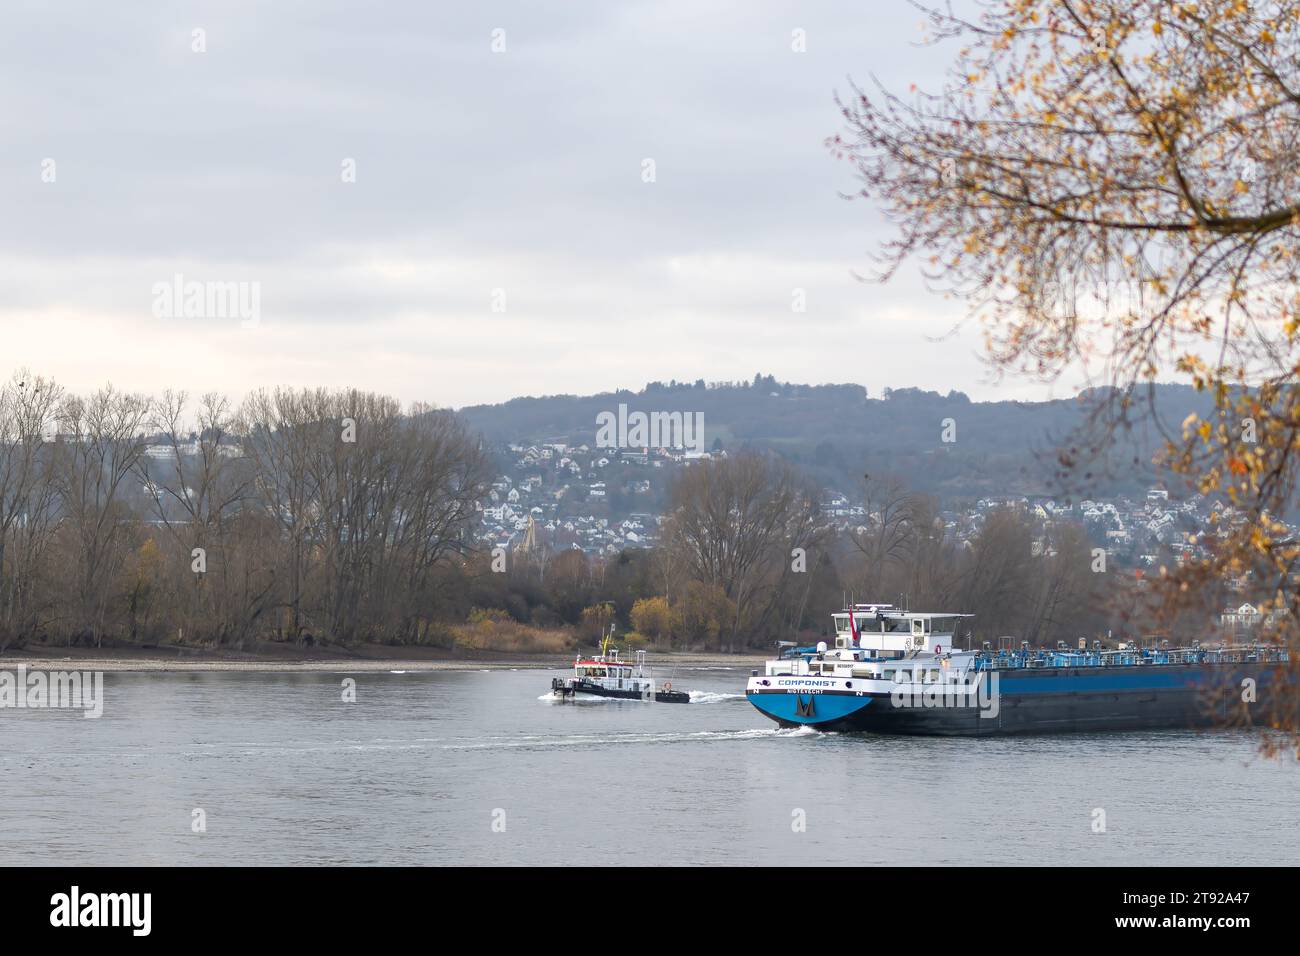 A small vessel passing a river barge on the river Rhine in autumn with branches with autumn foliage in the foreground Stock Photo